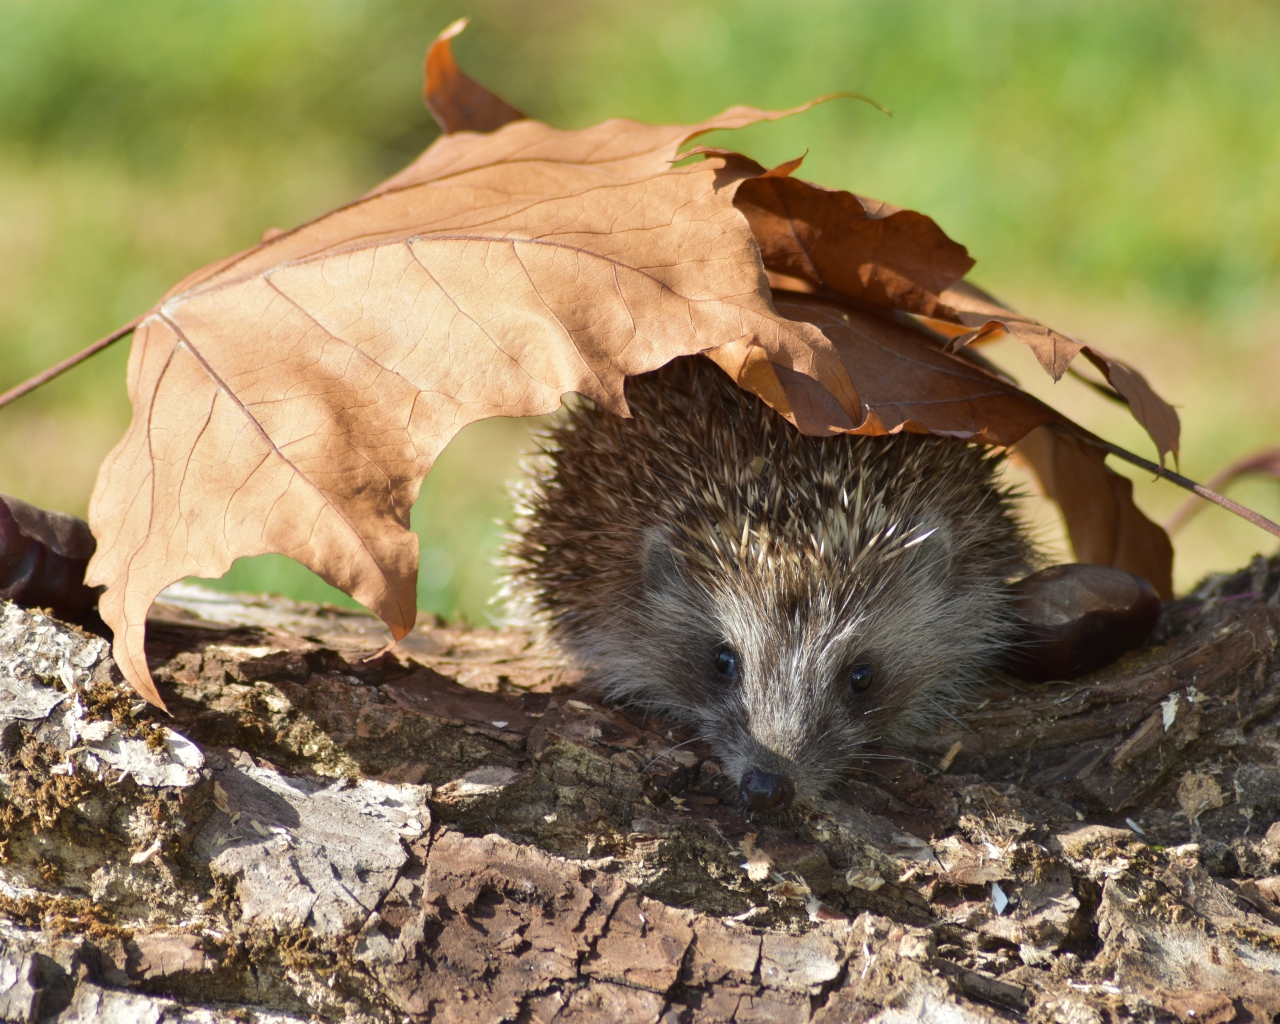 Spiny hedgehog on dry tree with fallen leaves